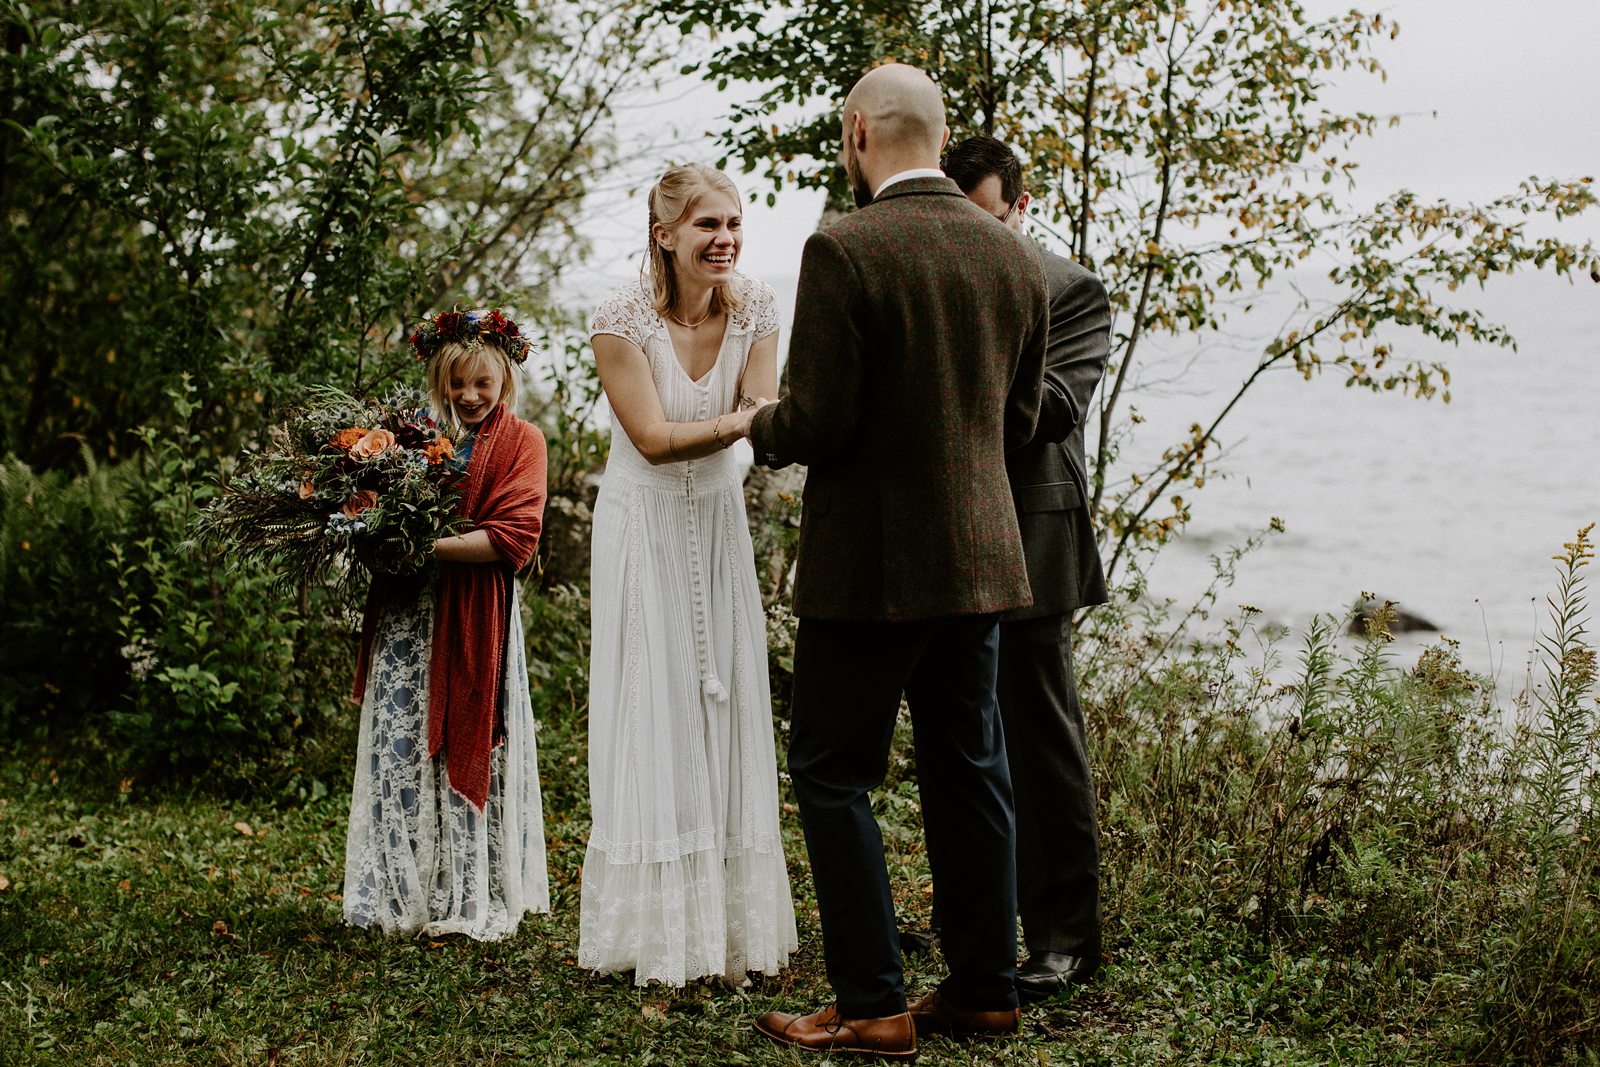 Paul and Taylor's intimate, eclectic North Shore wedding at a geodesic dome on the shores of Lake Superior was a special day I'll always remember!